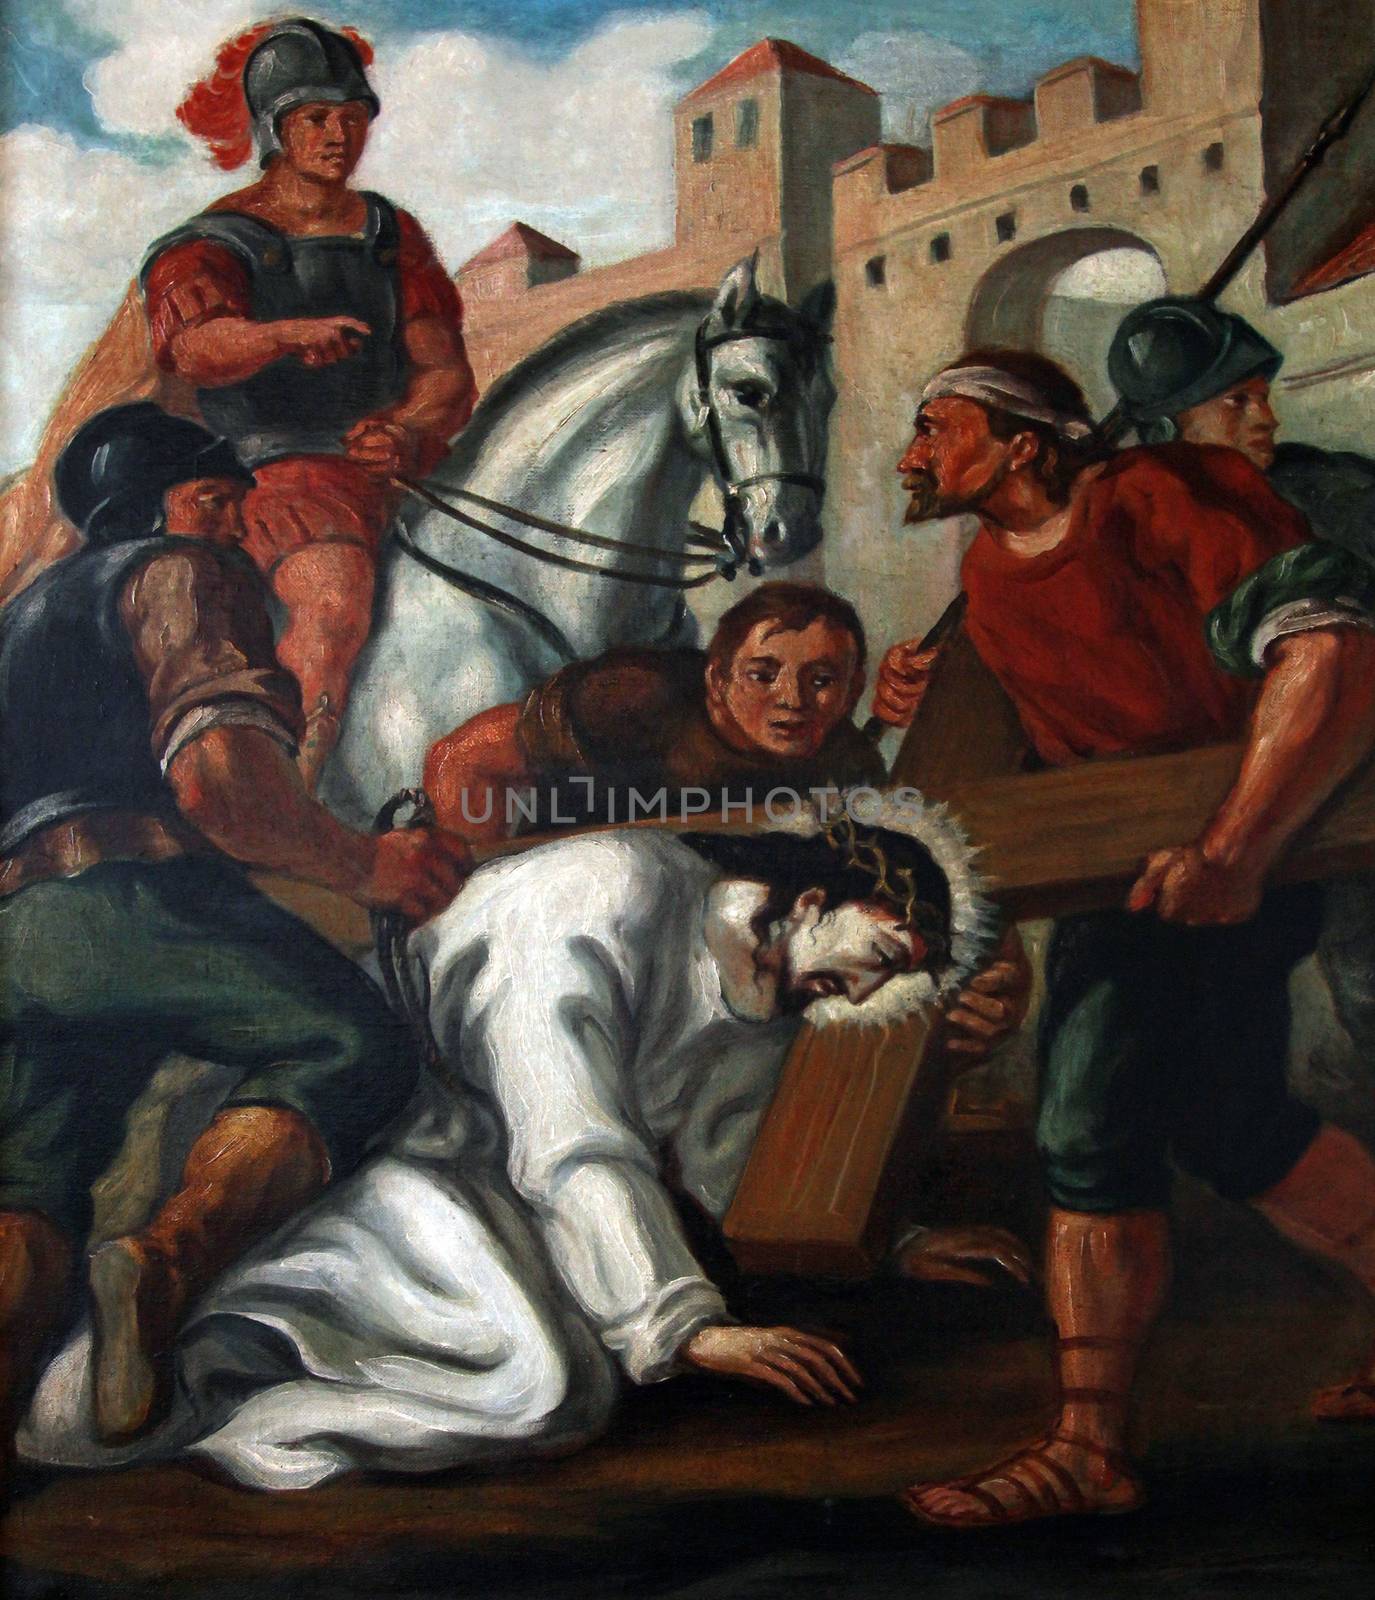 7th Stations of the Cross, Jesus falls the second time by atlas